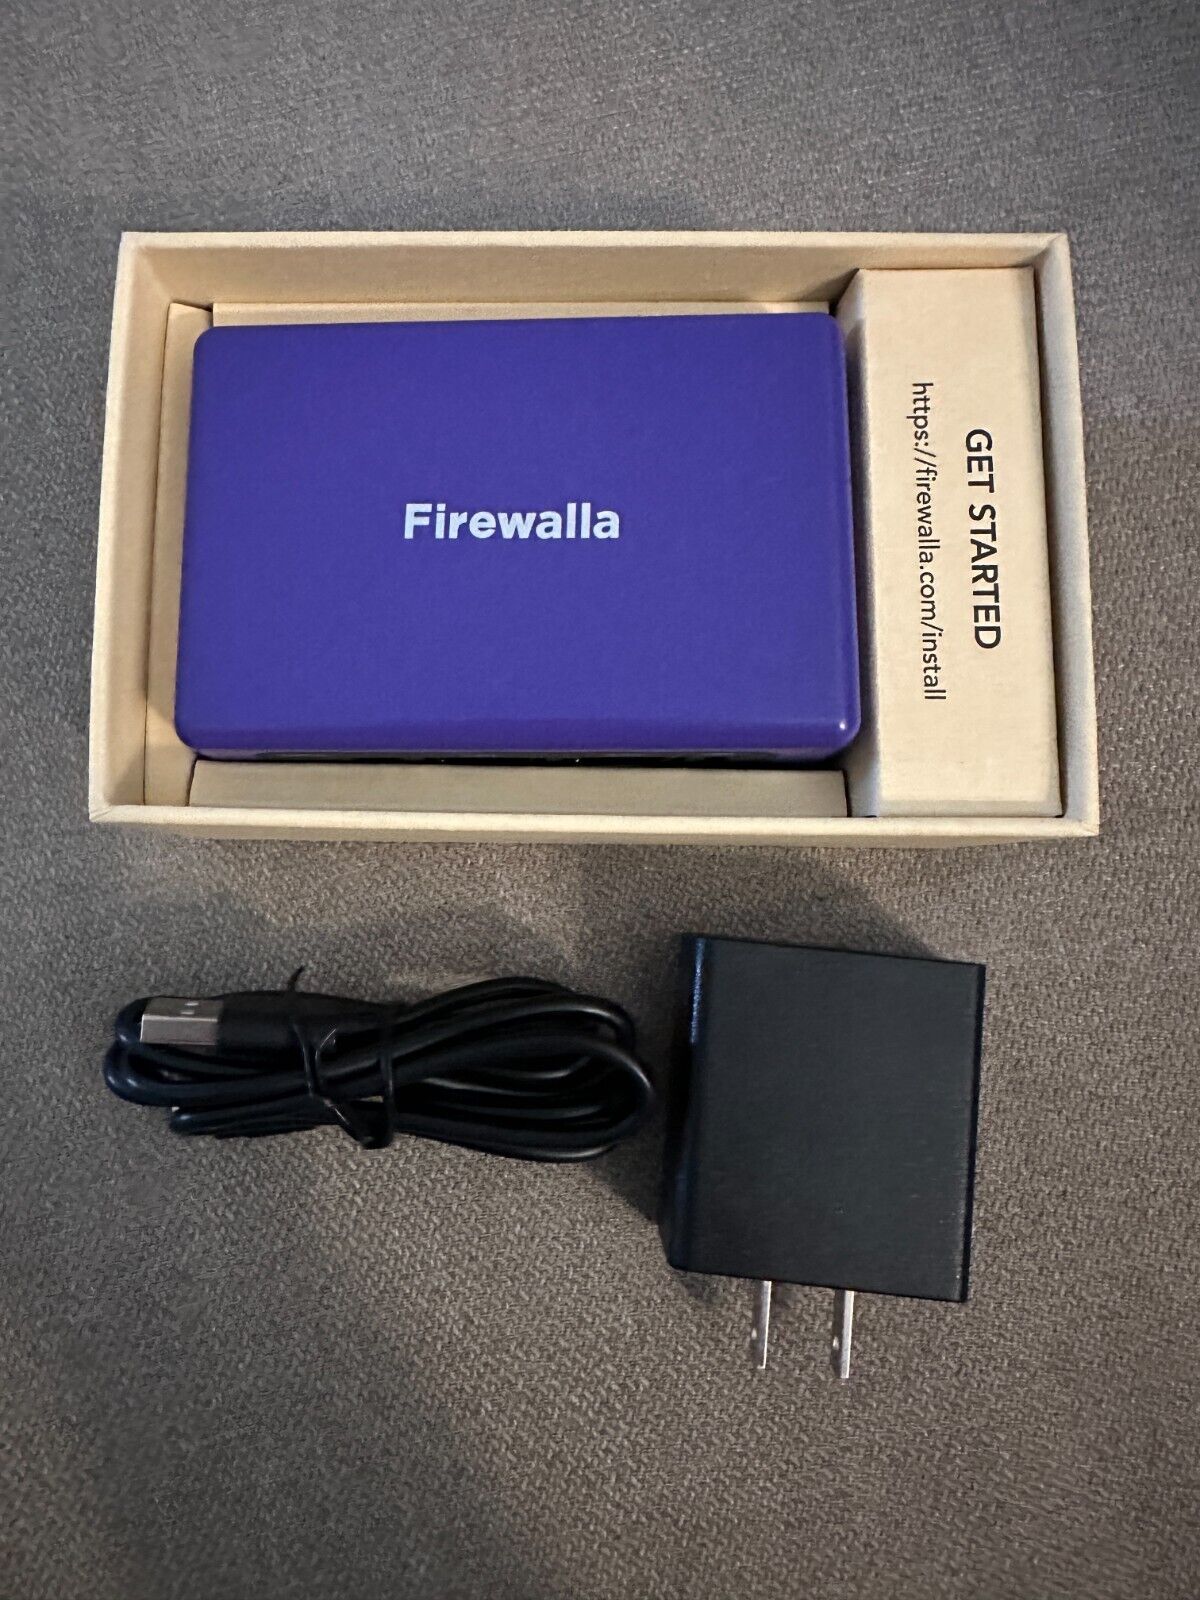 Firewalla Purple - Cyber Security Firewall for Home & Business